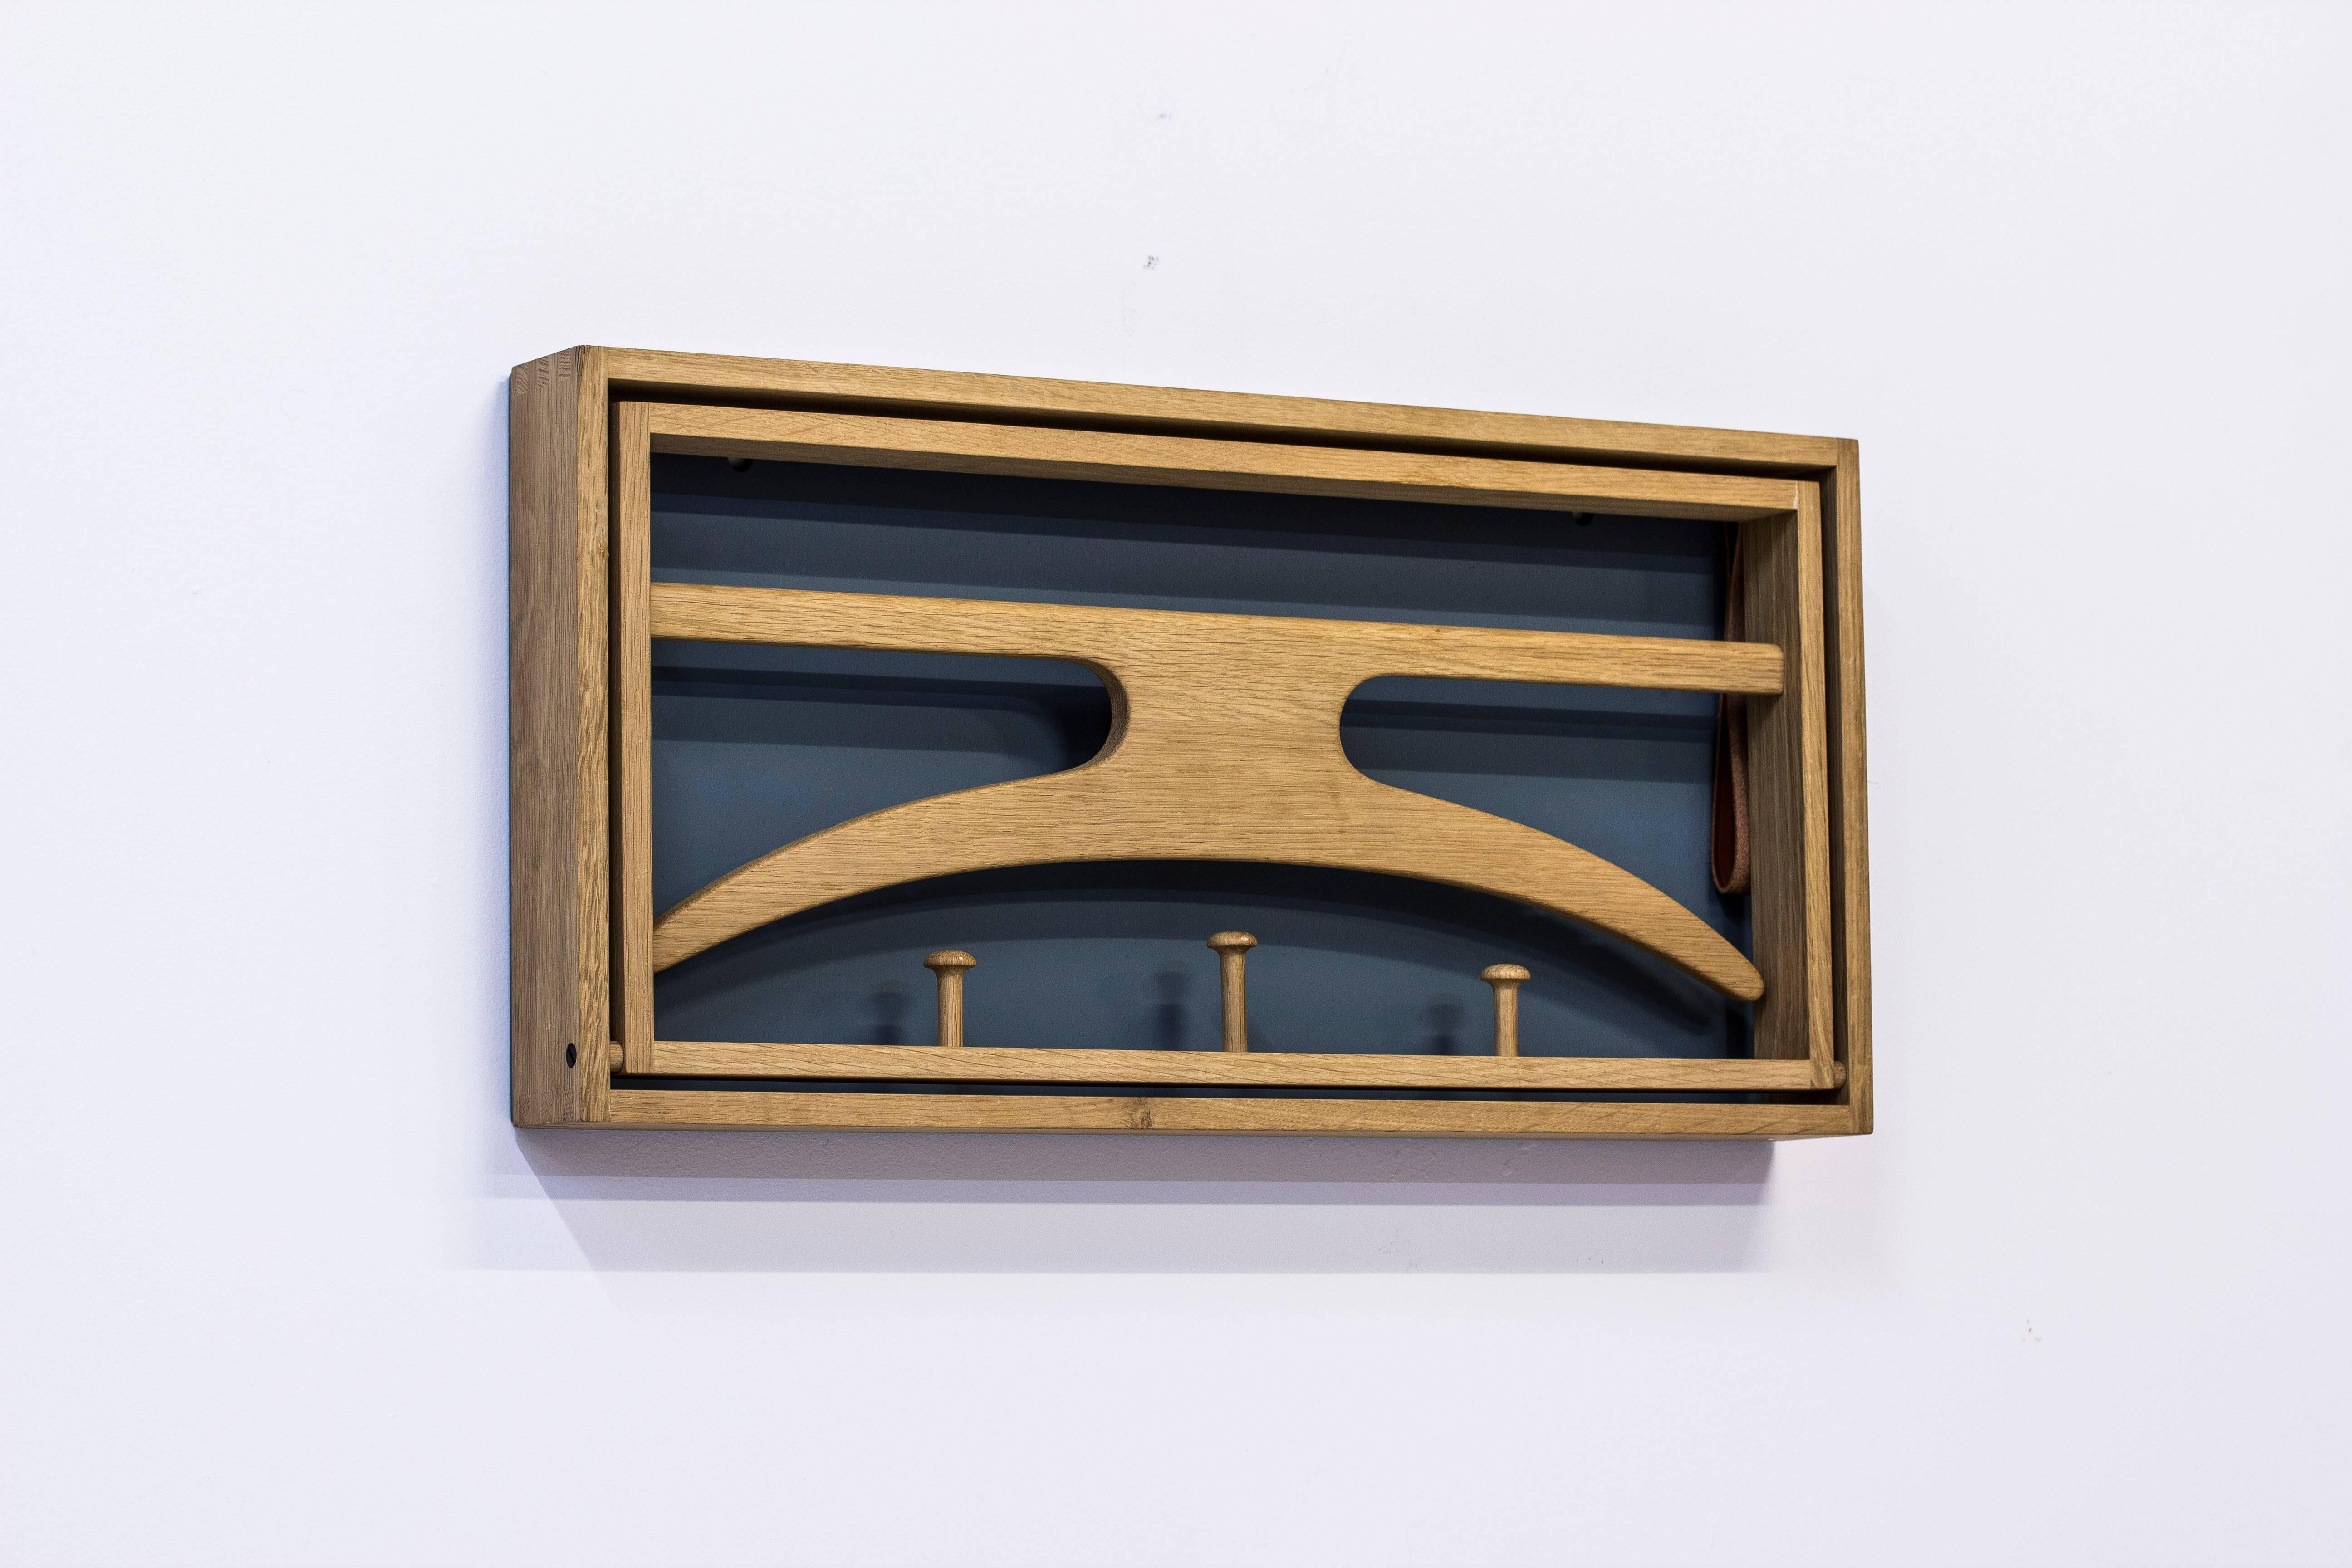 Wall mounted valet designed by Adam Hoff & Poul Østergaard. Produced in Denmark during the late 1950s by Virum Møbelsnedkeri. Solid oak frame with visible joinery, original leather straps and lacquered back part. Very good condition with light wear